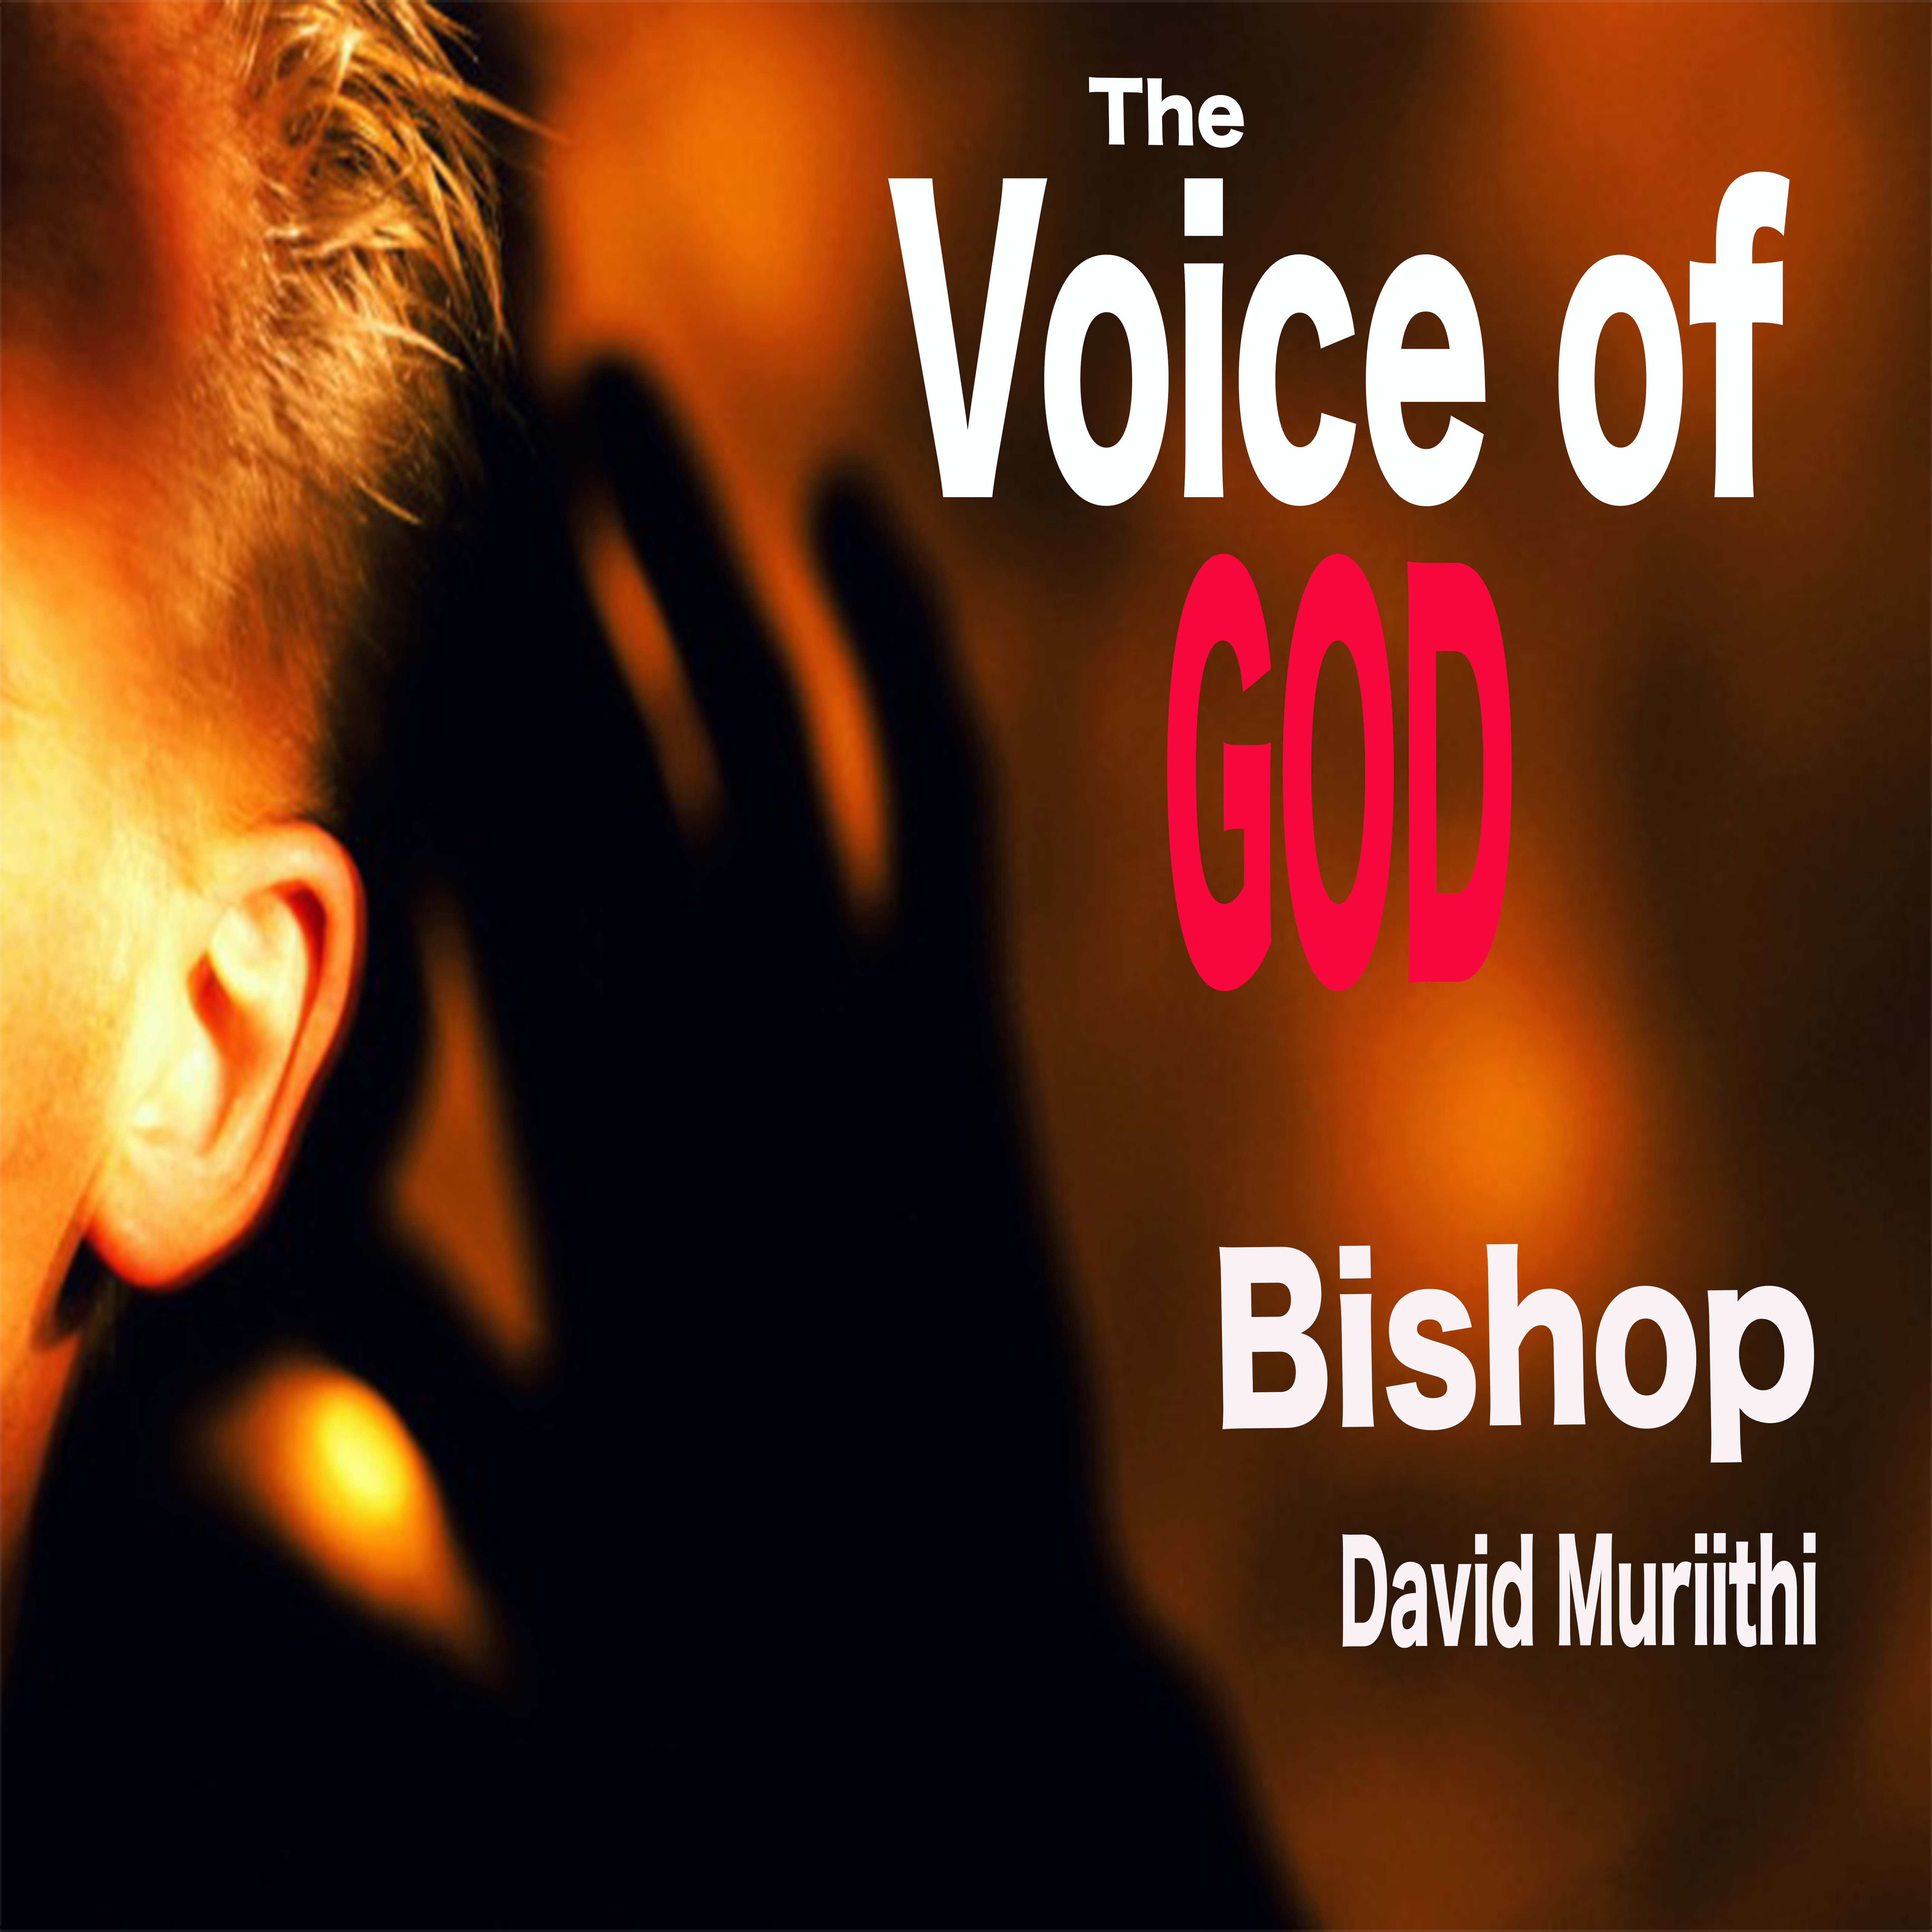 The voice of God